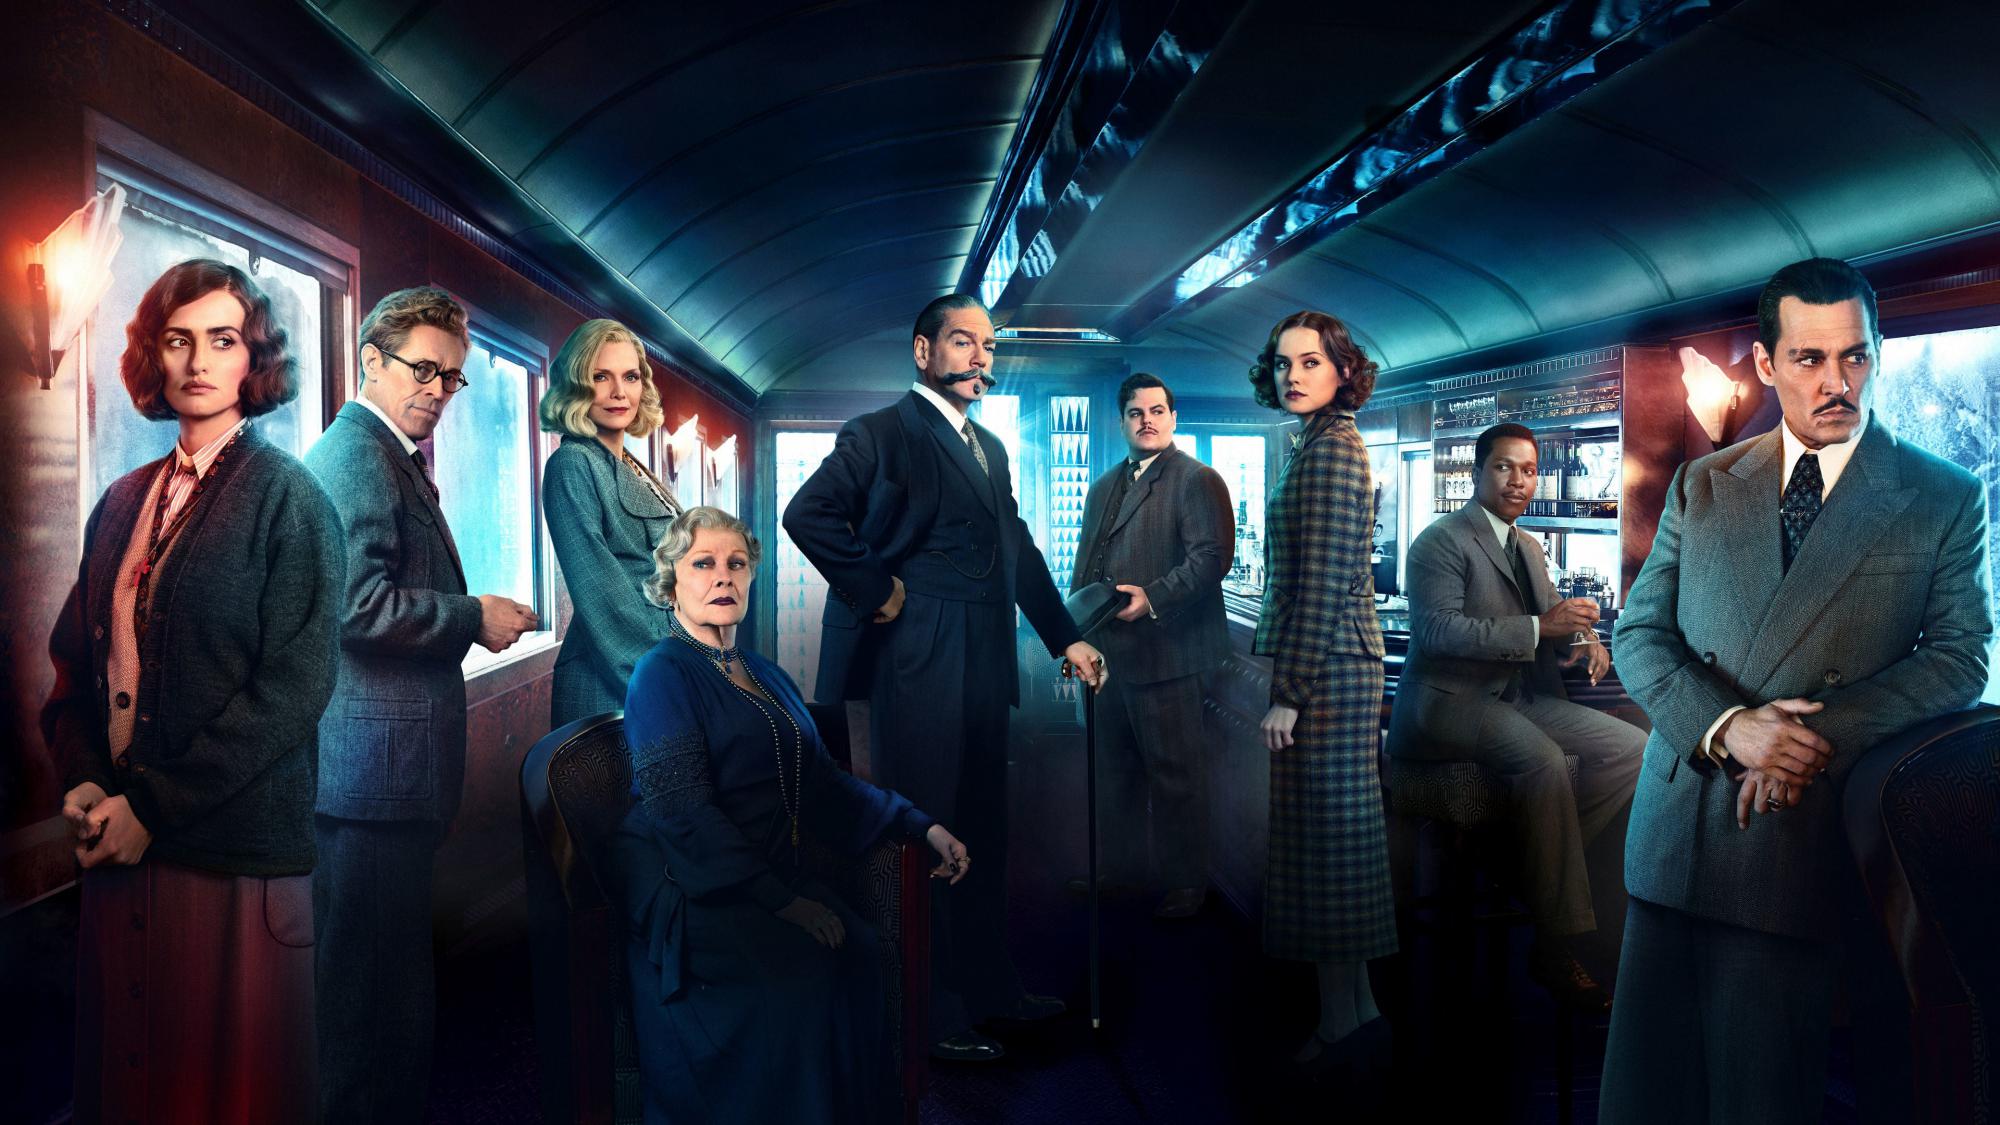 Backdrop Image for Murder on the Orient Express